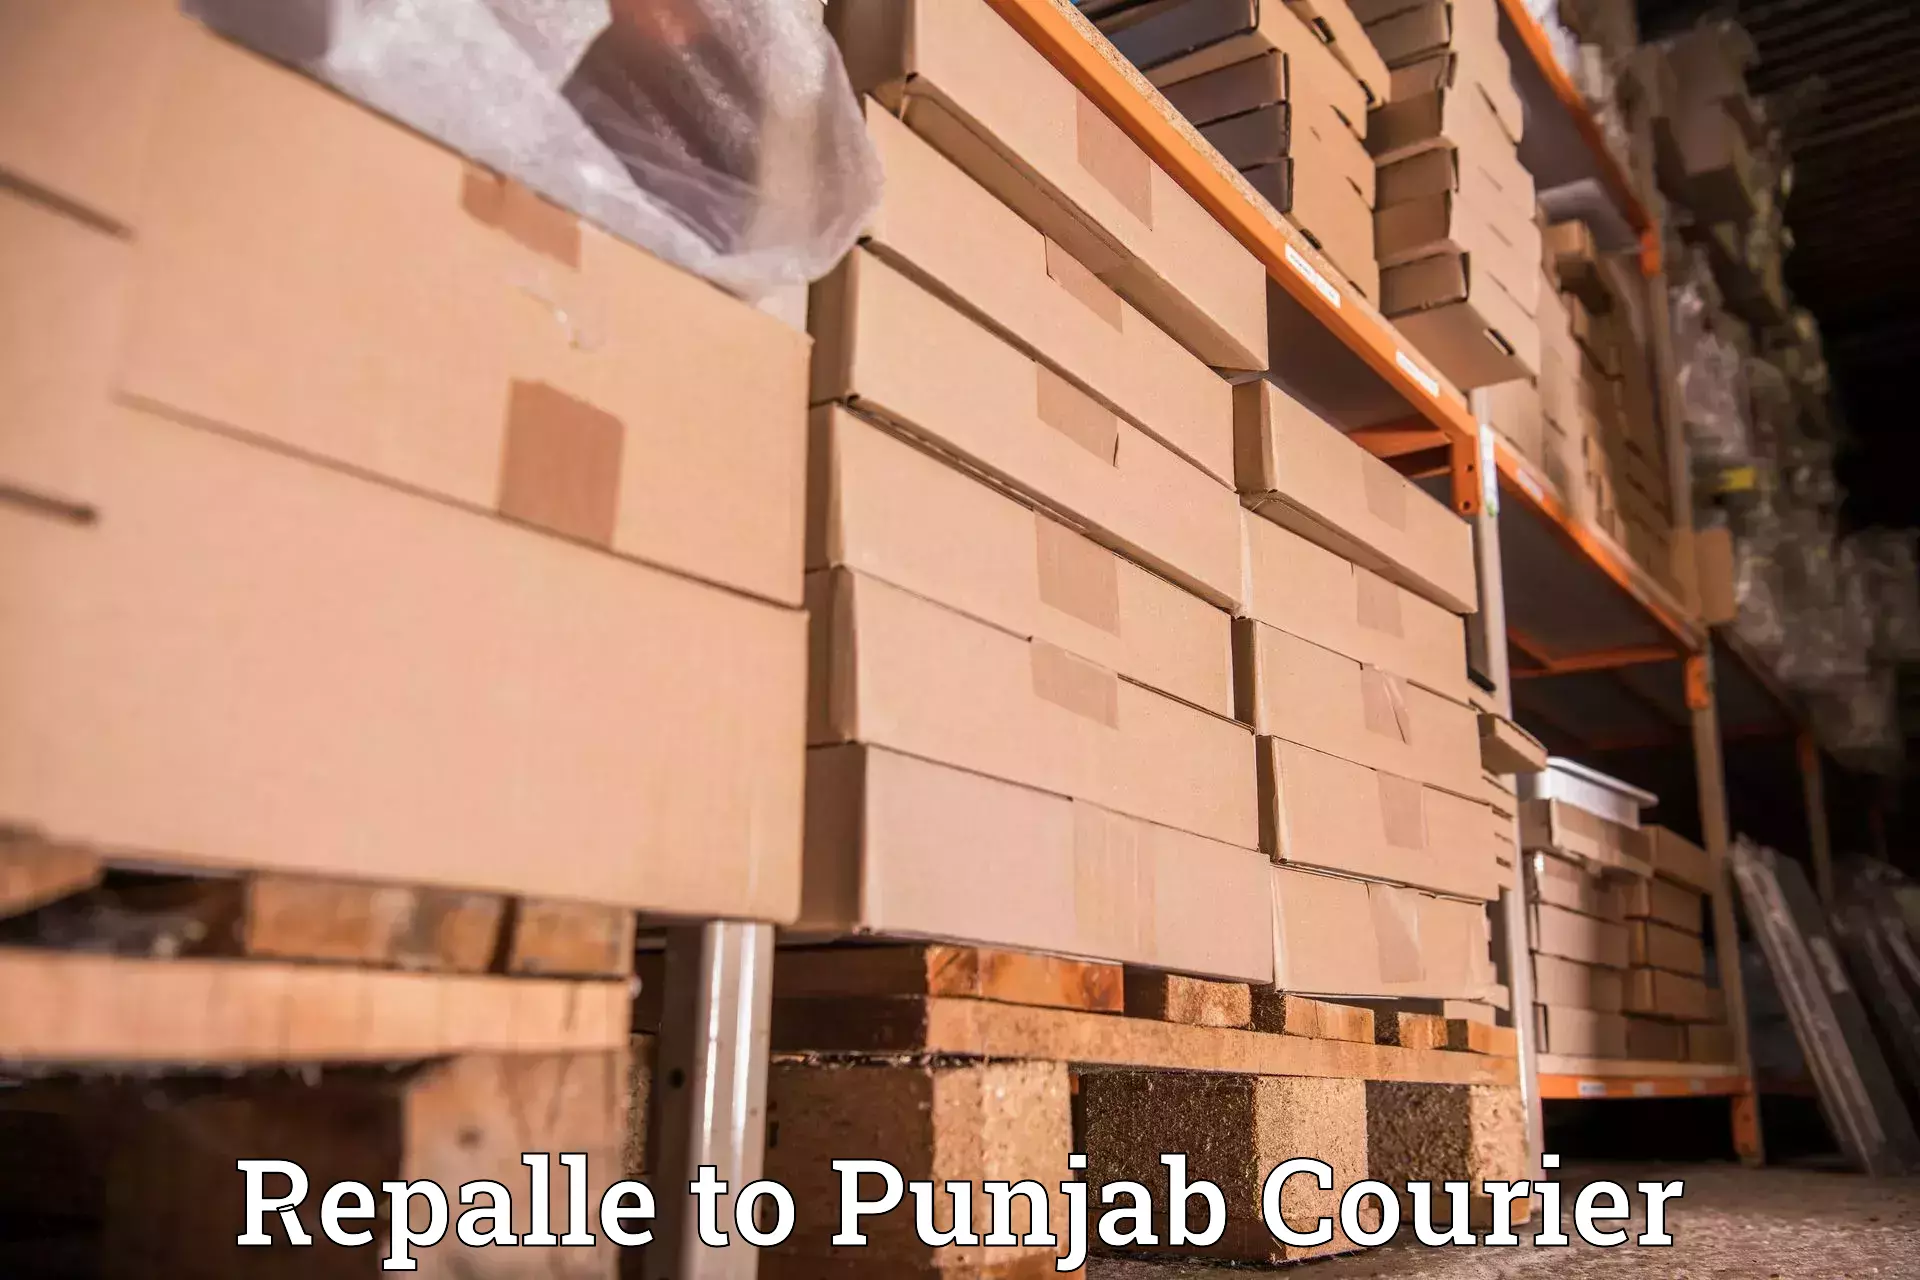 Retail shipping solutions Repalle to Central University of Punjab Bathinda